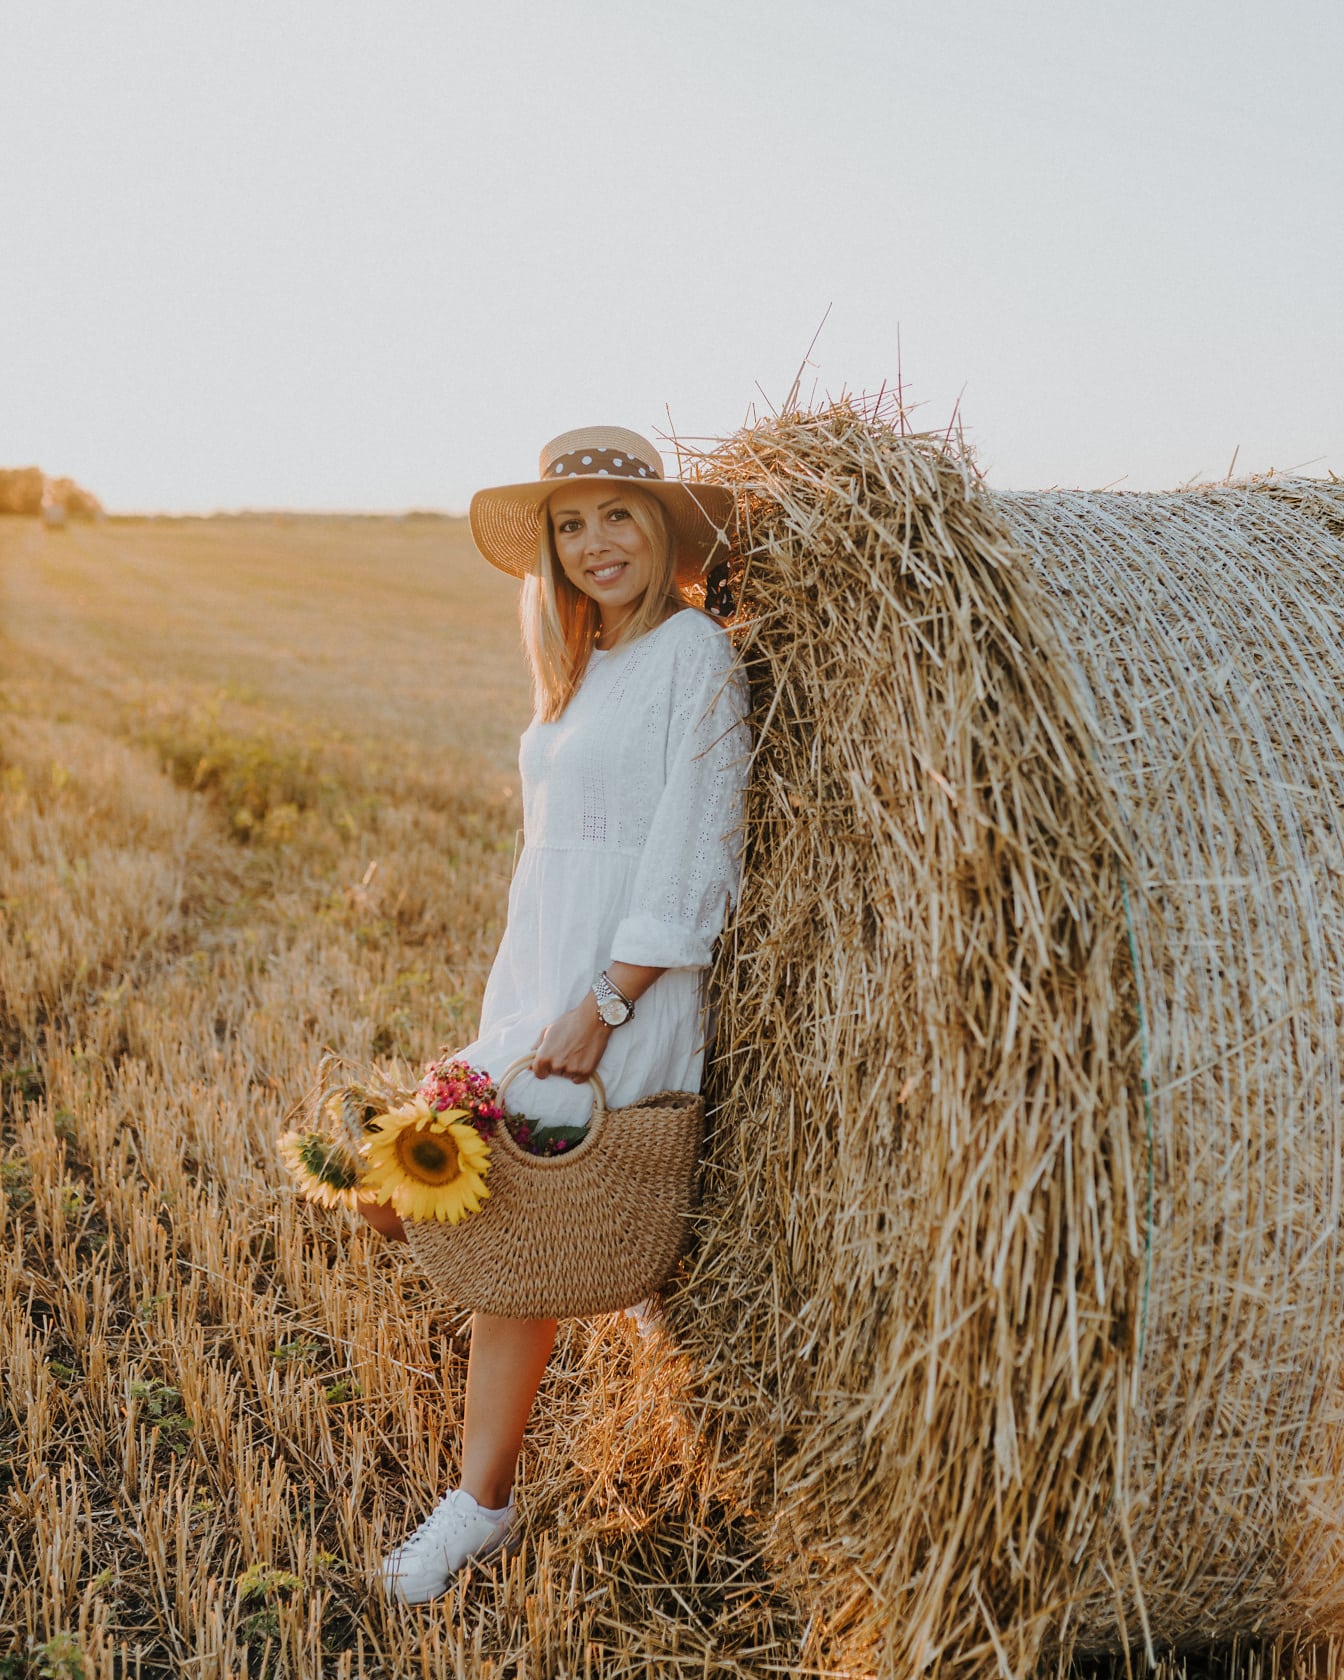 Cheerful blonde with straw hat bn haystack in wheat field on sunny day